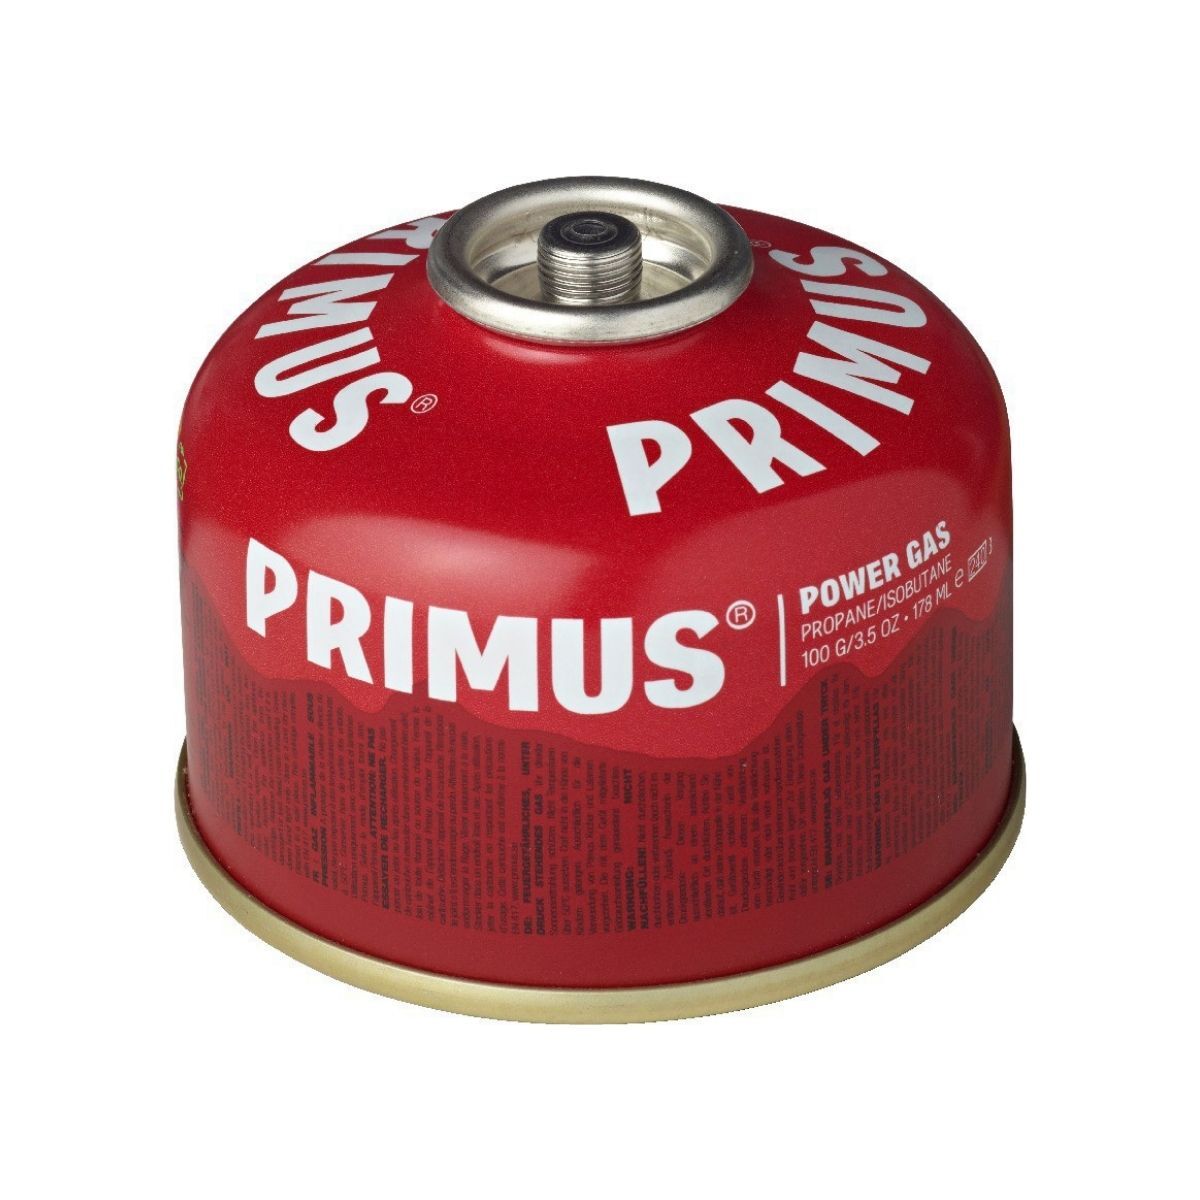 Primus Power Gas 100 g L1 - Gas canister